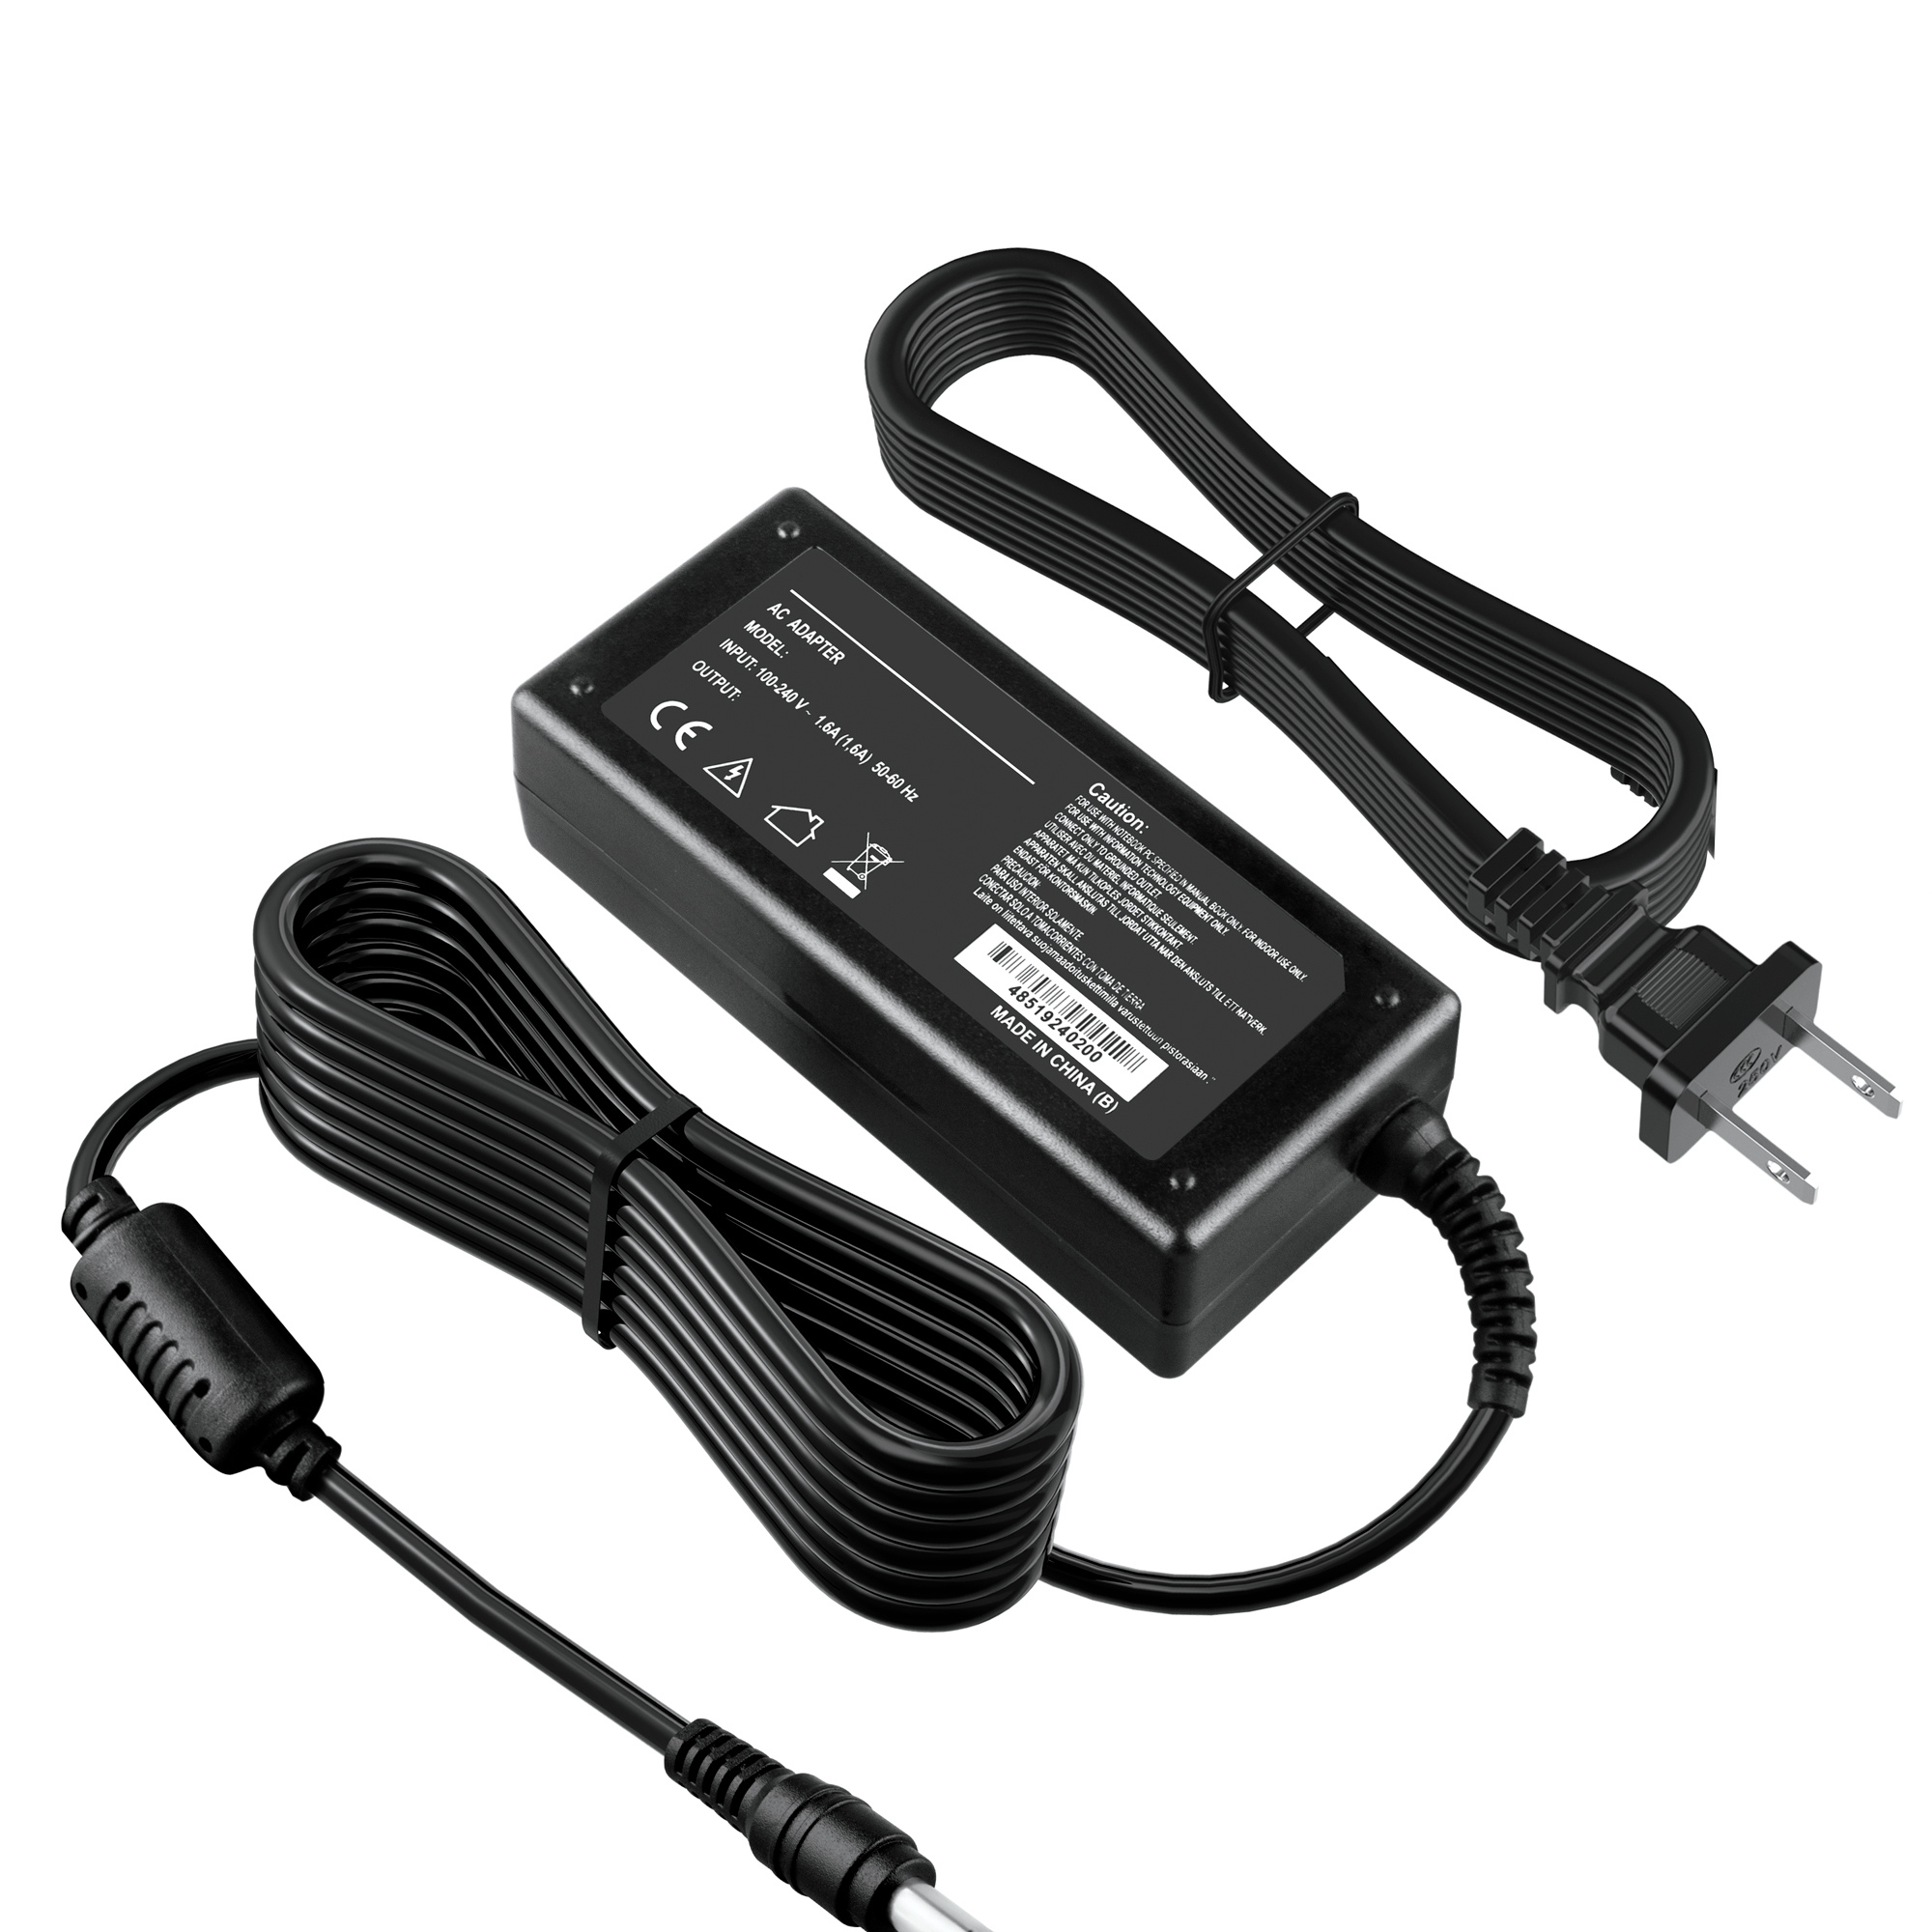 PKPOWER 65W DC Adapter Charger Replacement for Intel NUC NUC7I7BNH BOXNUC7I7BNH NUC7i5BNH PSU - image 1 of 5